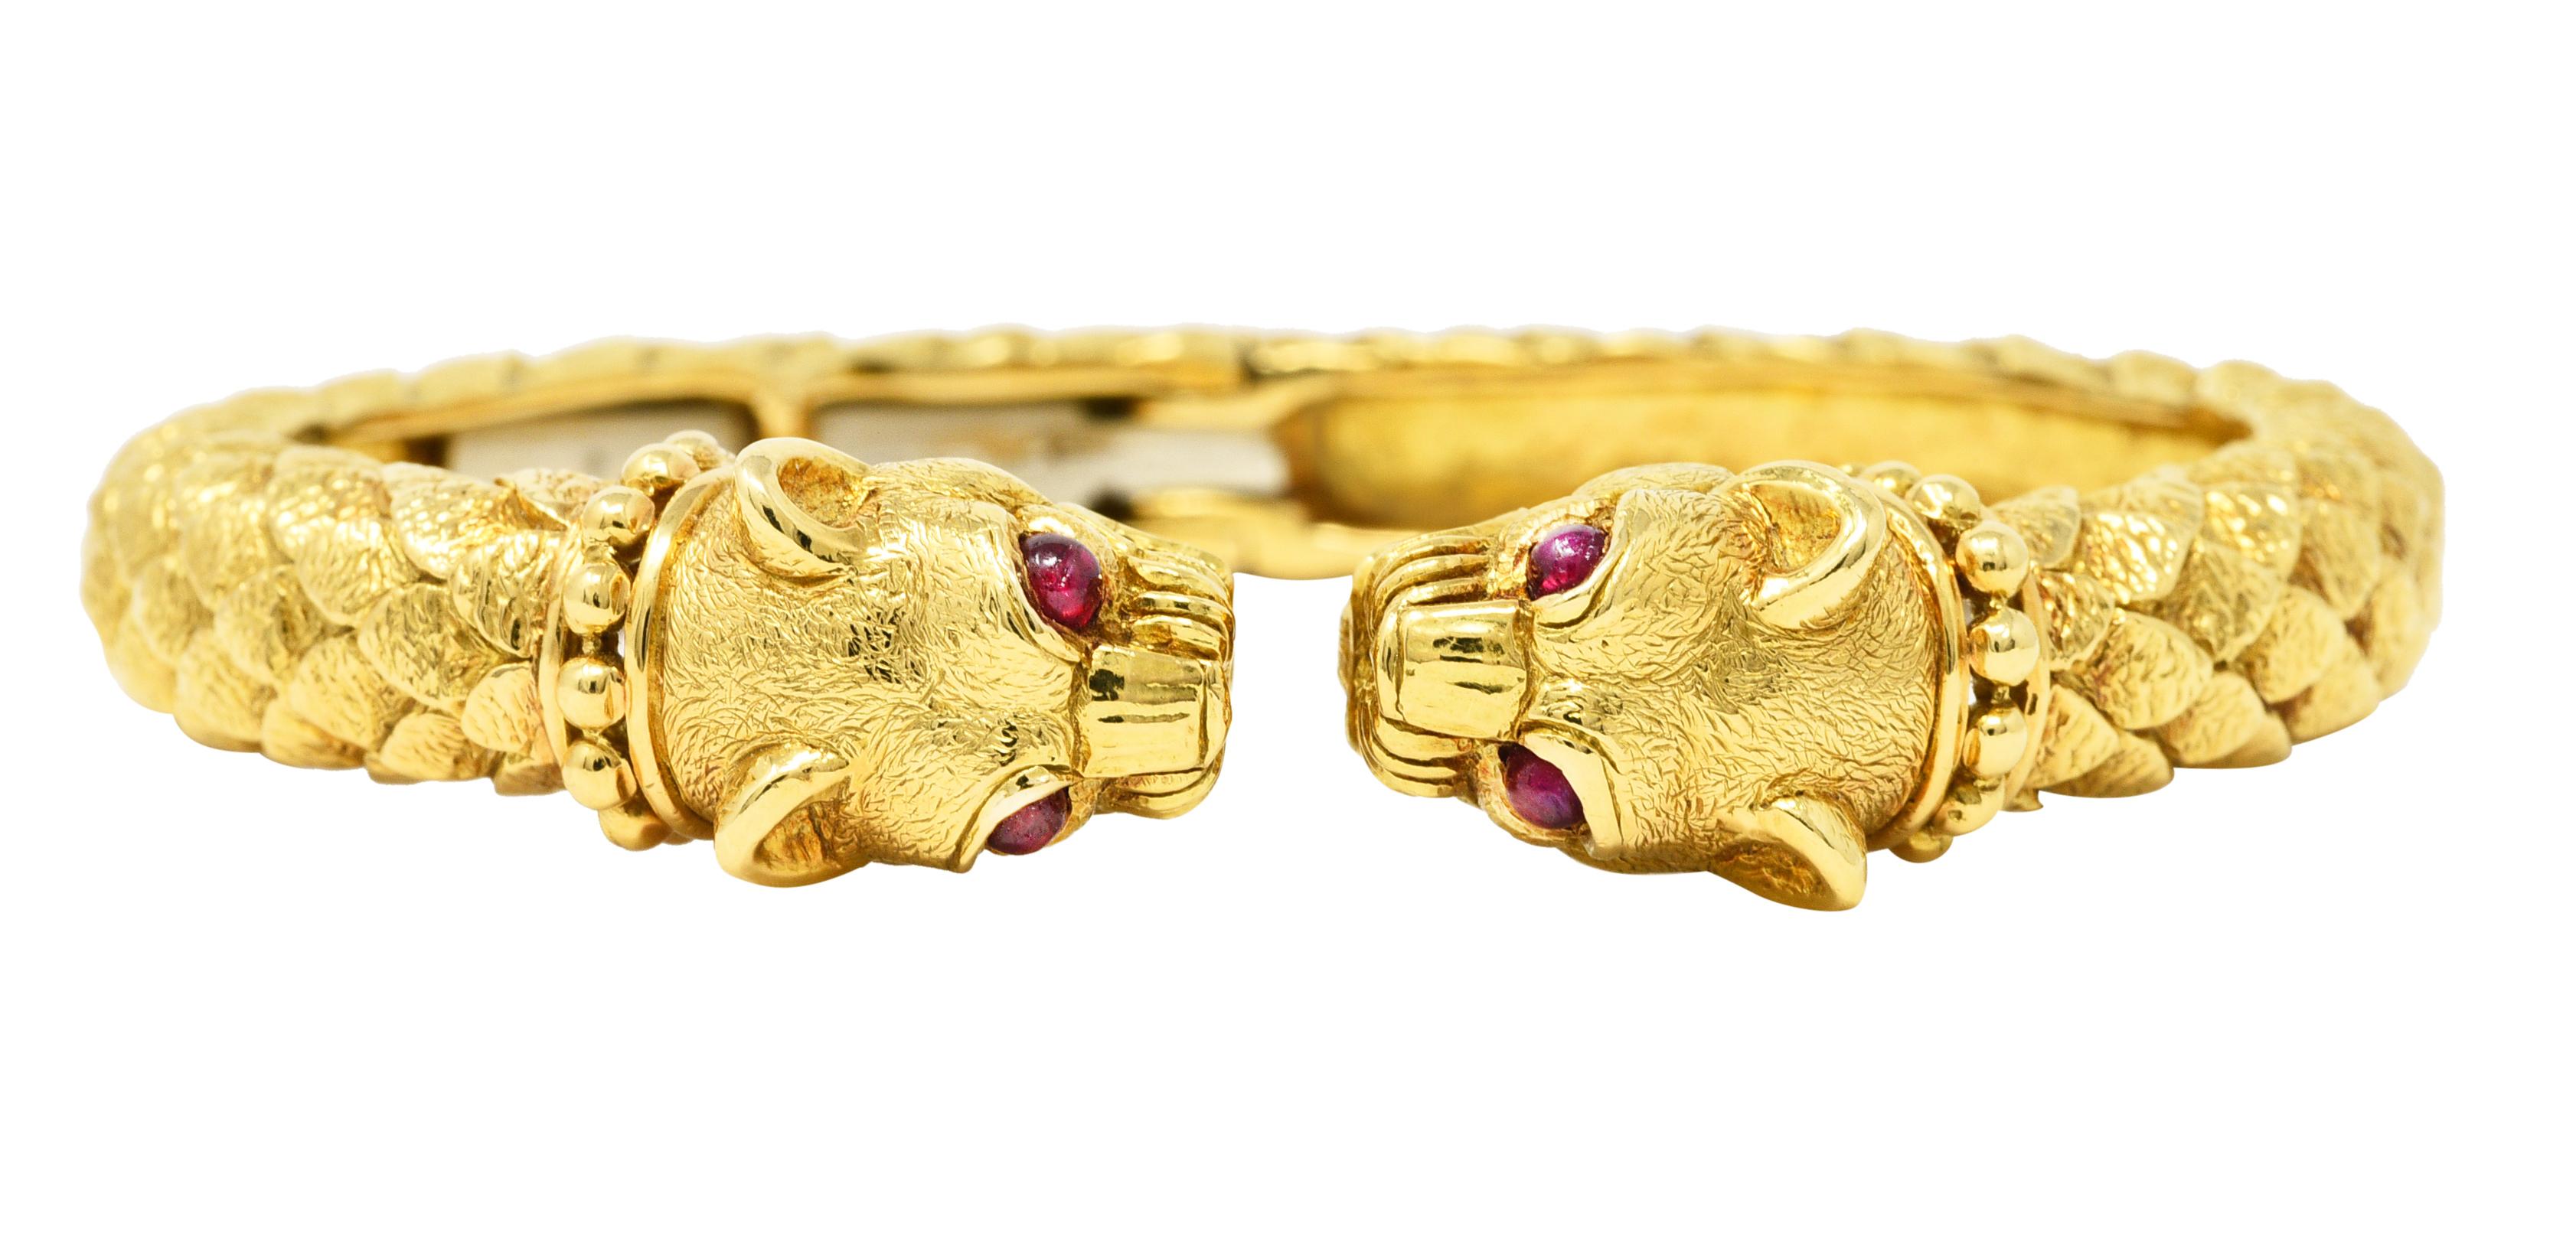 Cuff bracelet designed as two stylized panther heads with texturous scales. Featuring gold bead collars, detailed snarling faces, and textured fur. Each panther head has two 2.5 mm round ruby cabochon eyes. Rubies are well matched medium red in